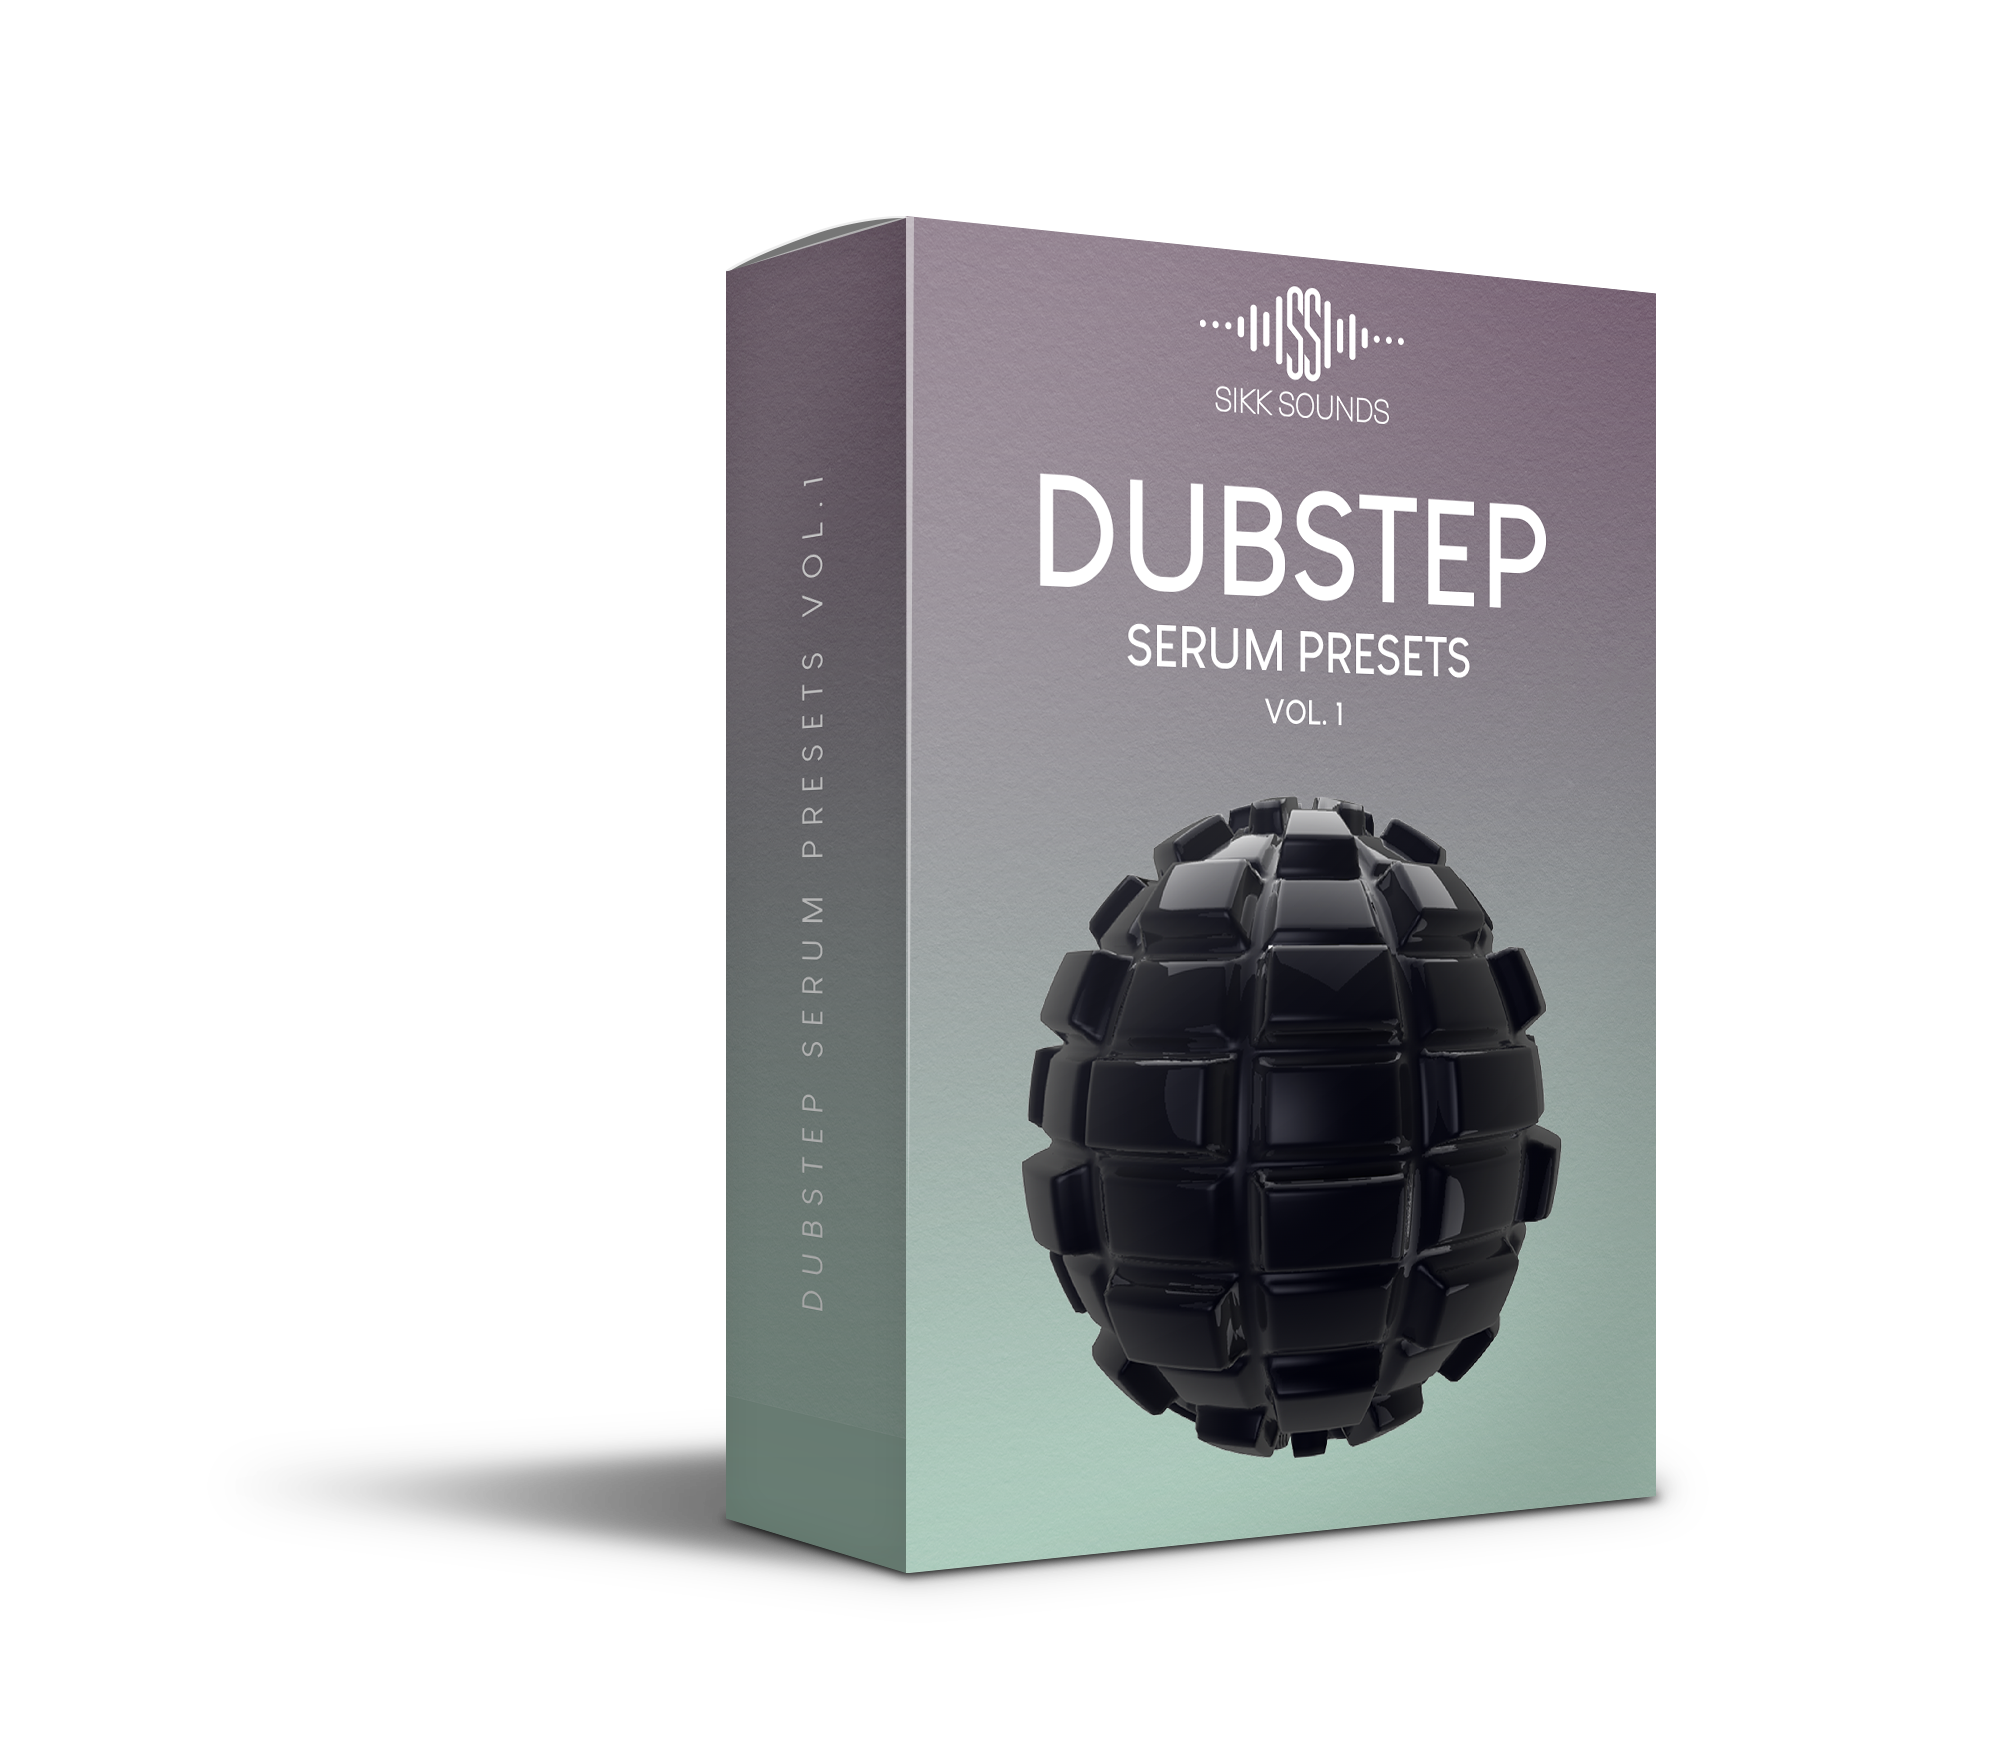 Dubstep Serum Preset Sample Pack: High-Quality Serum Presets for Electronic Music Production